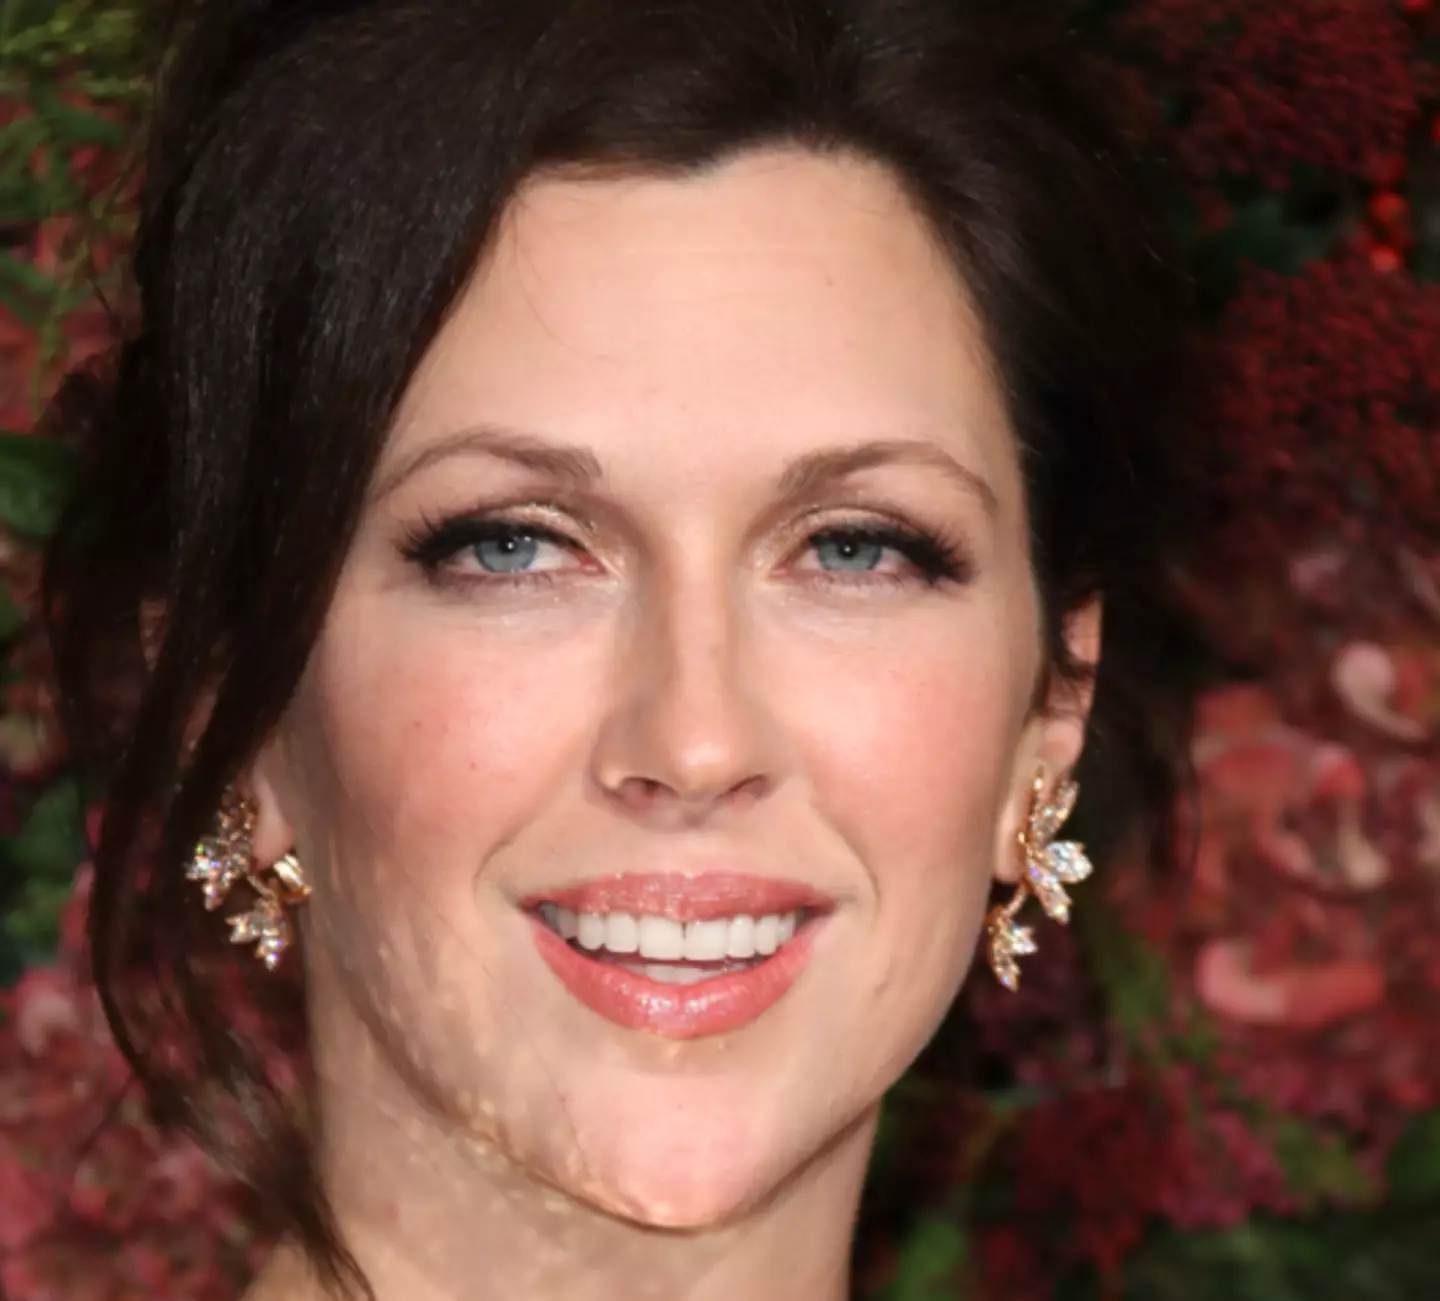 Margot Stilley said the film 'hasn't affected' her career.